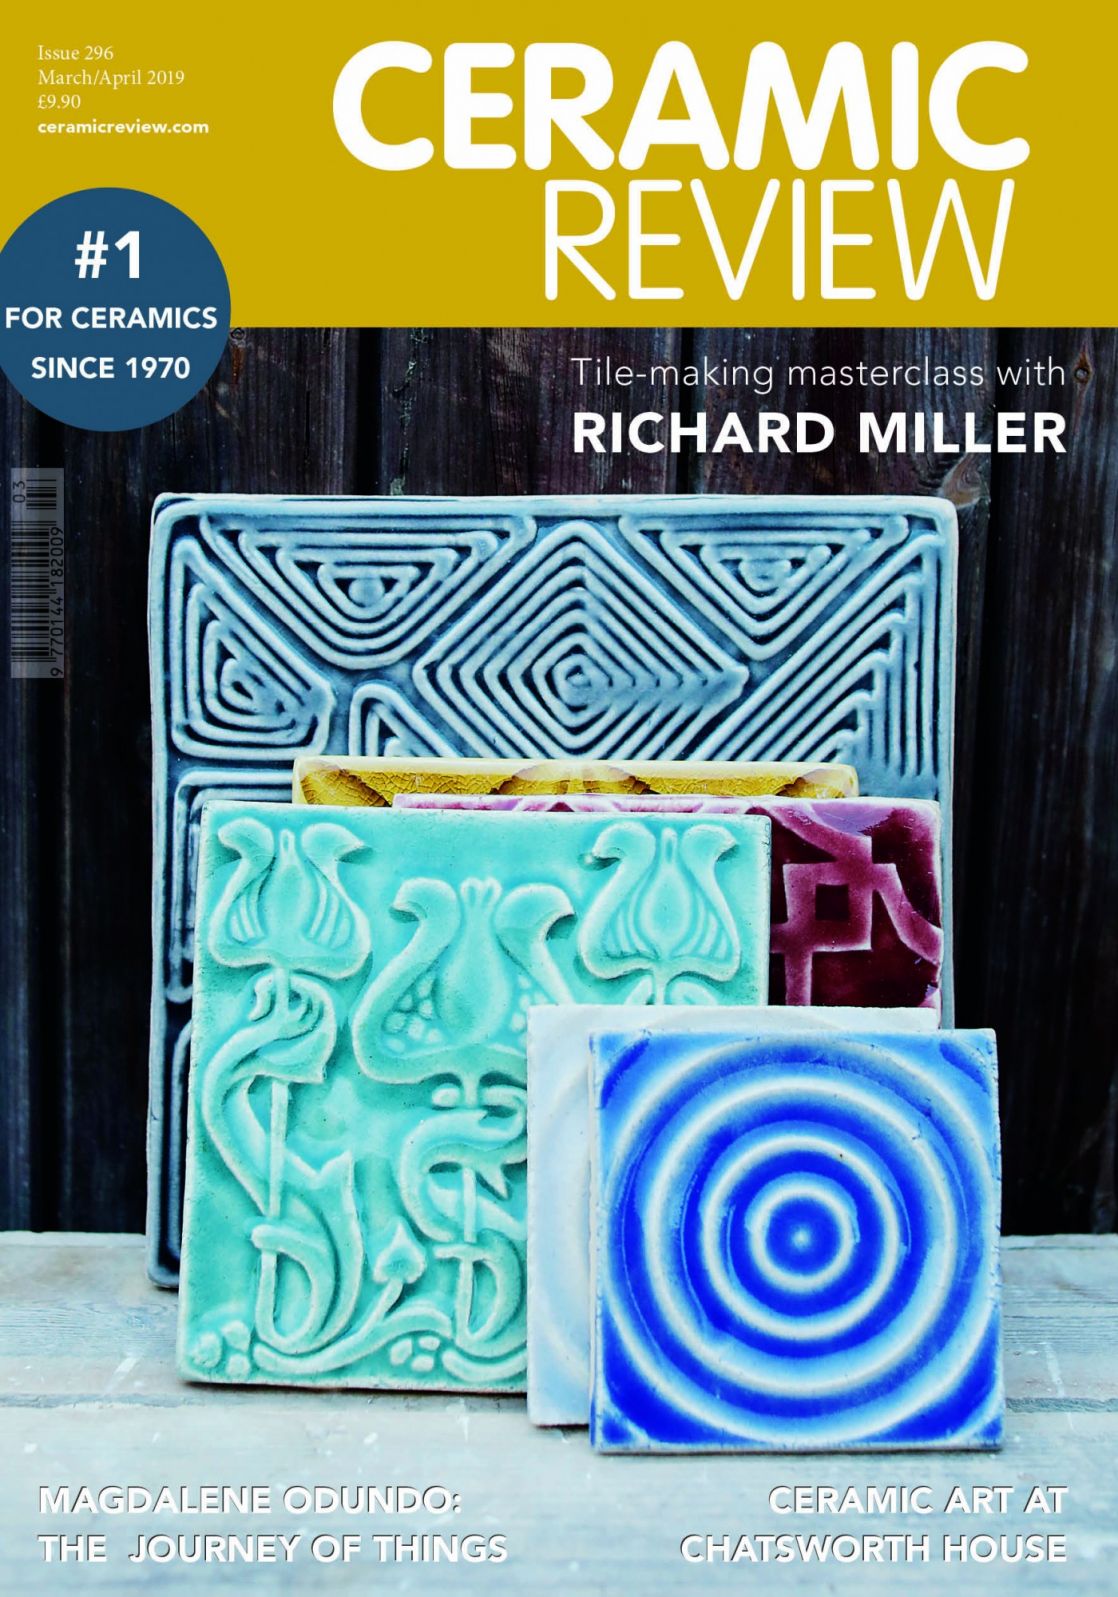 Ceramic Review CR issue 296 March April 2019